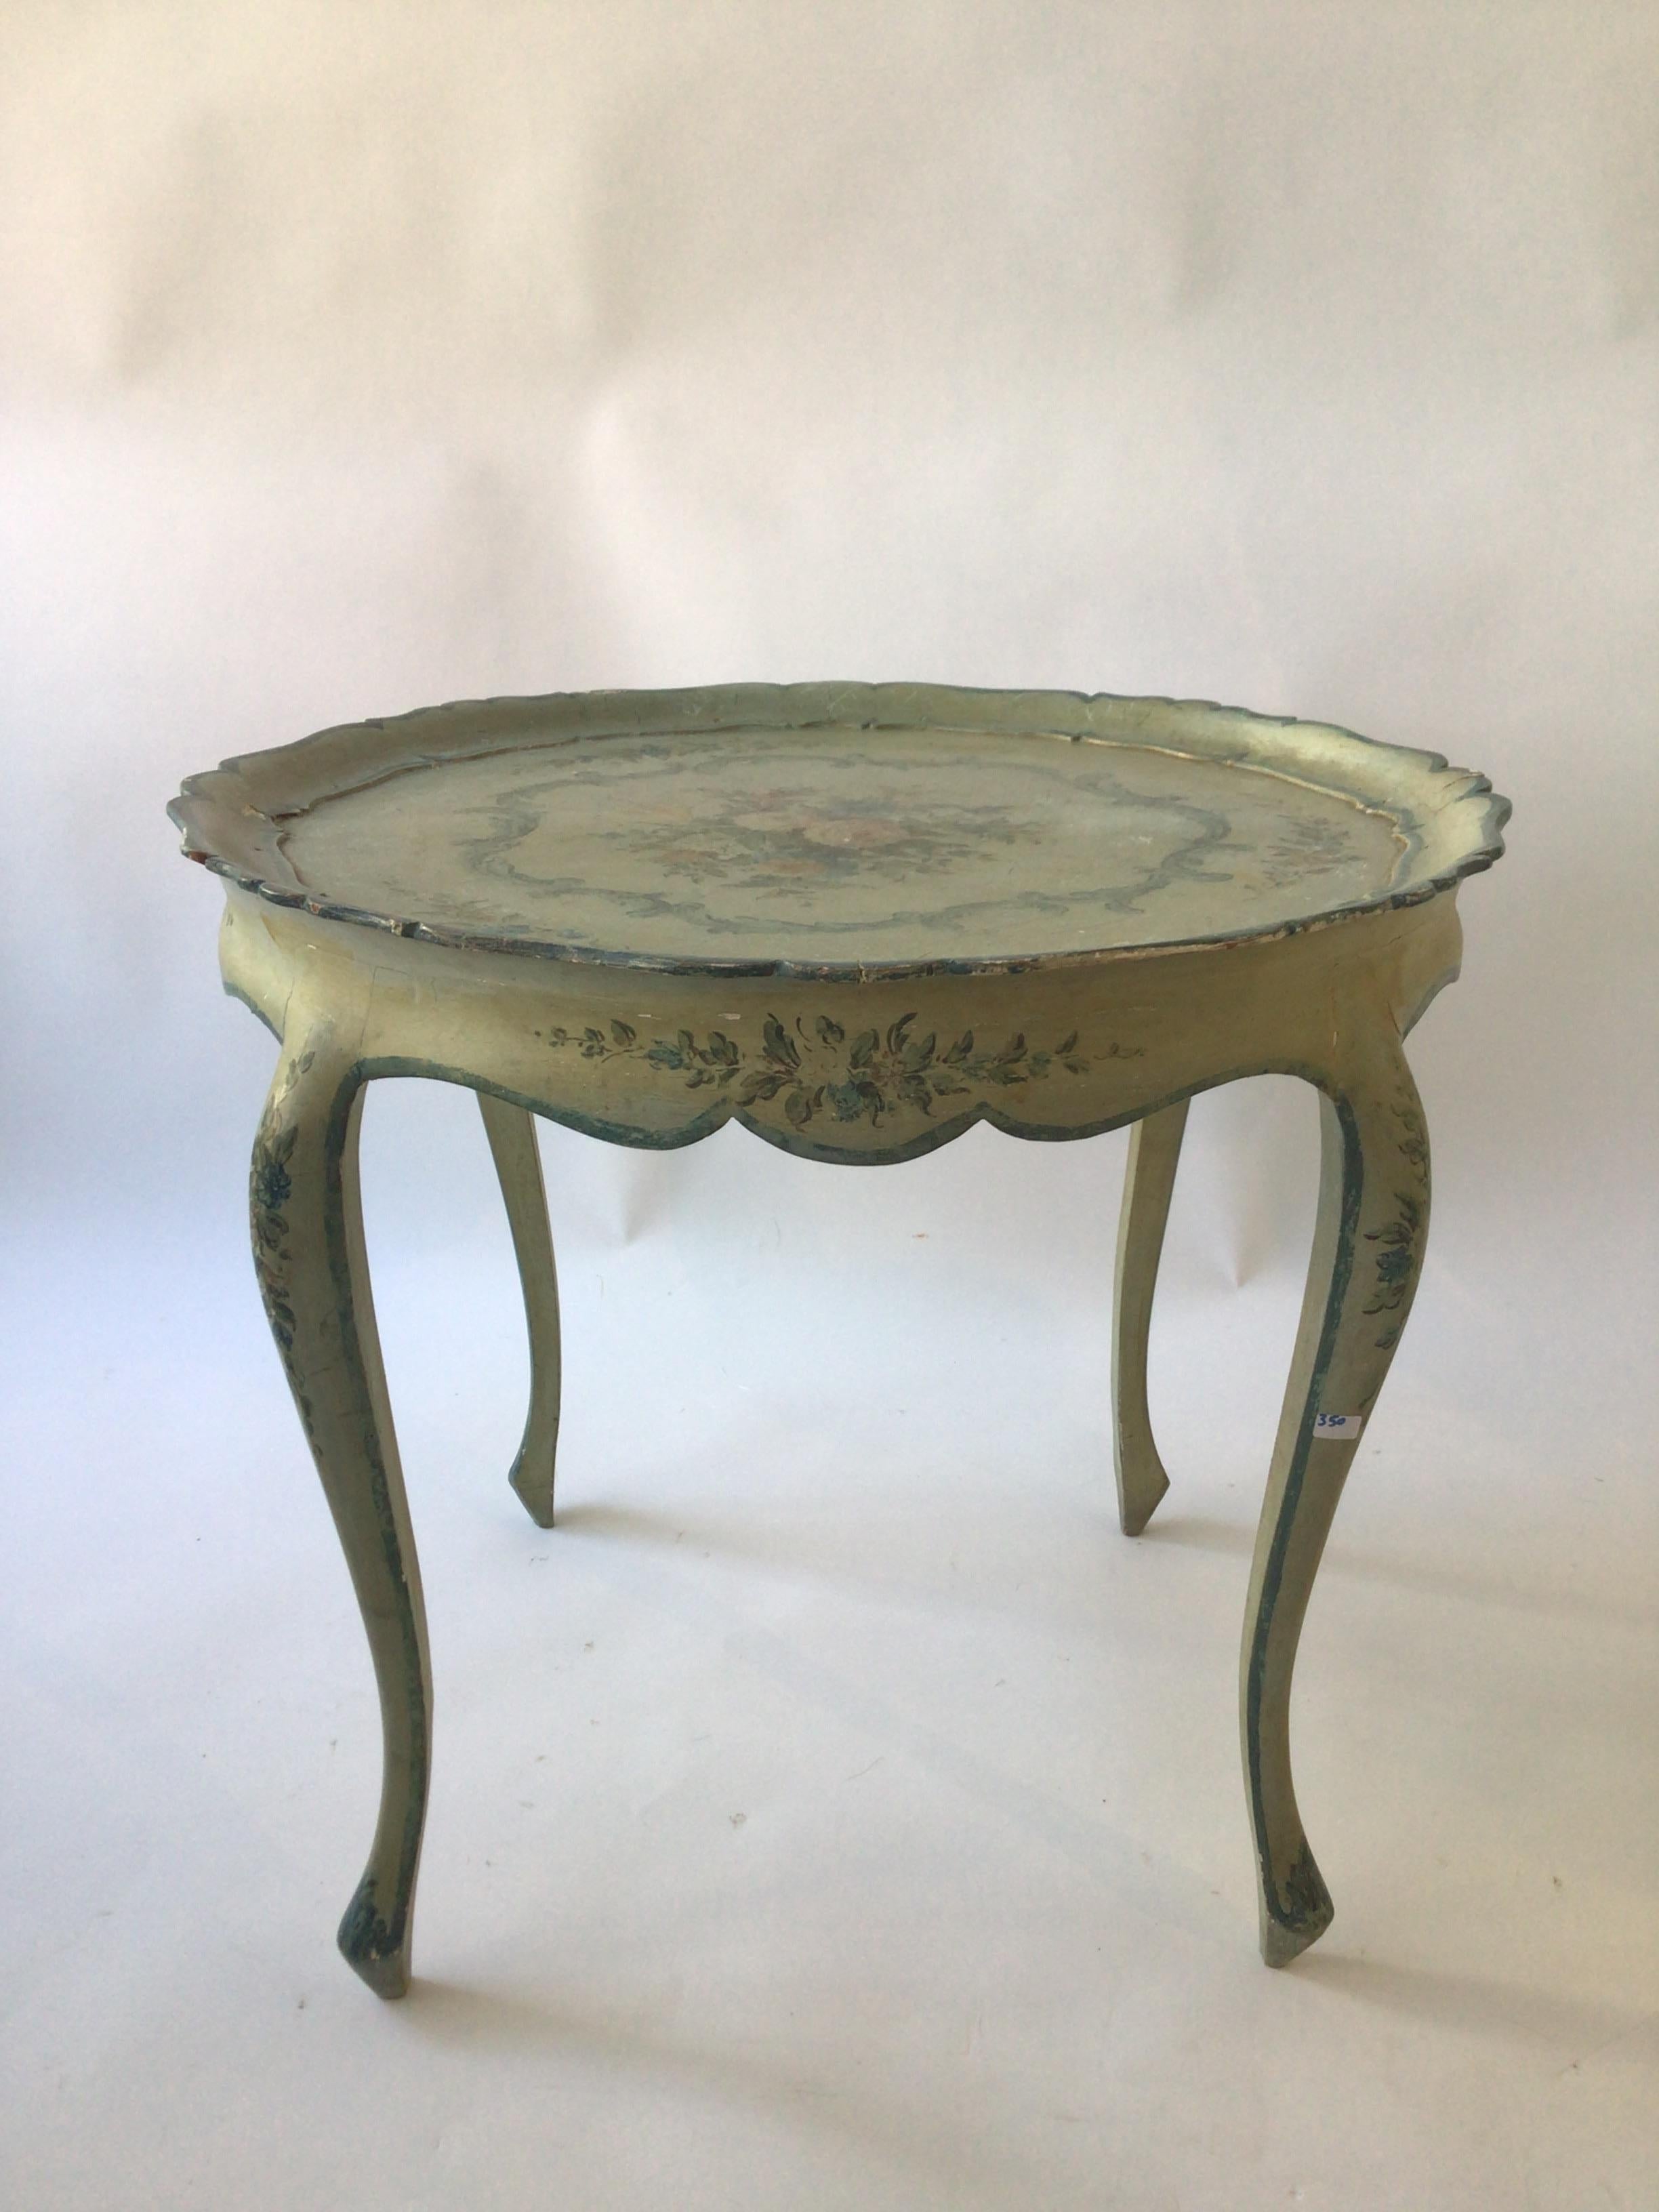 1950s Venetian hand painted floral table. The table is teal. Blueish green..
This table can be shipped via UPS.